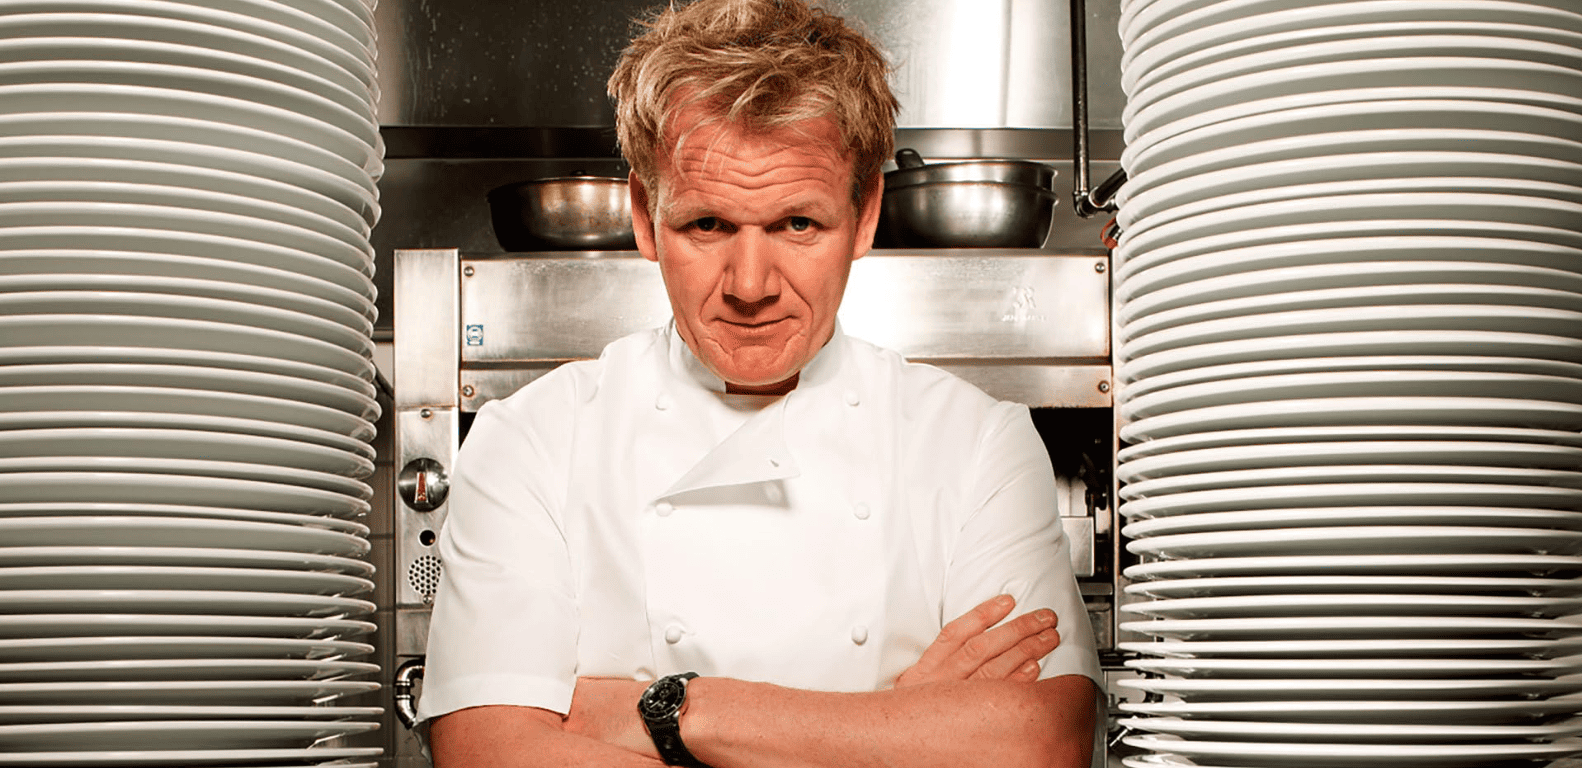 The 7 Best ‘Kitchen Nightmares’ Episodes to Prepare for the New Season